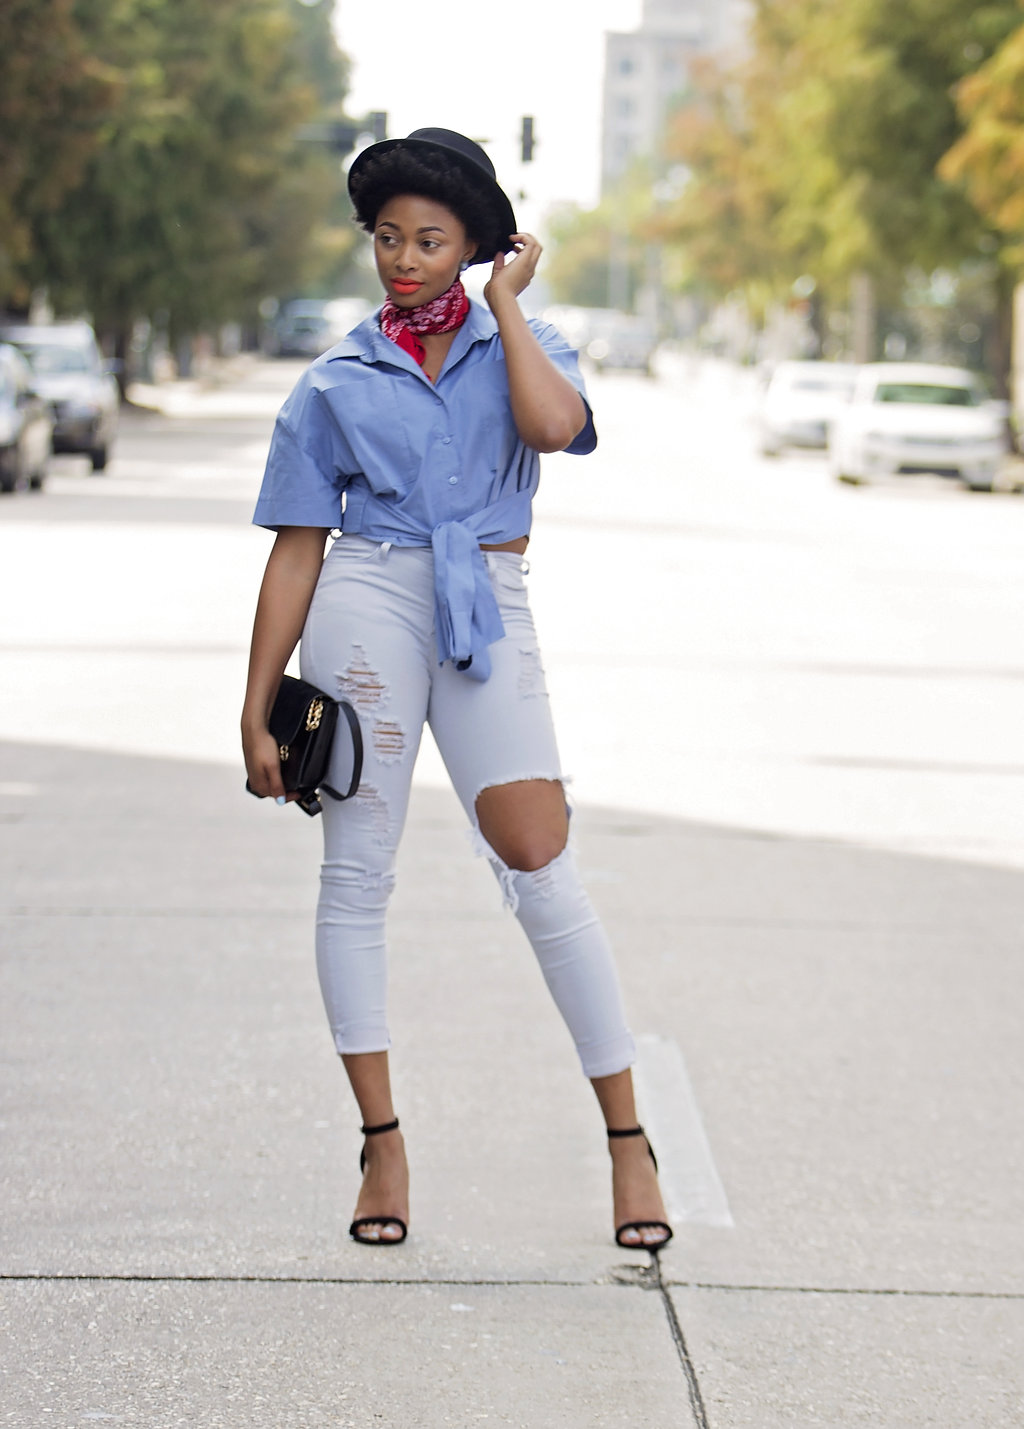 louisiana street style, how to wear distressed jeans